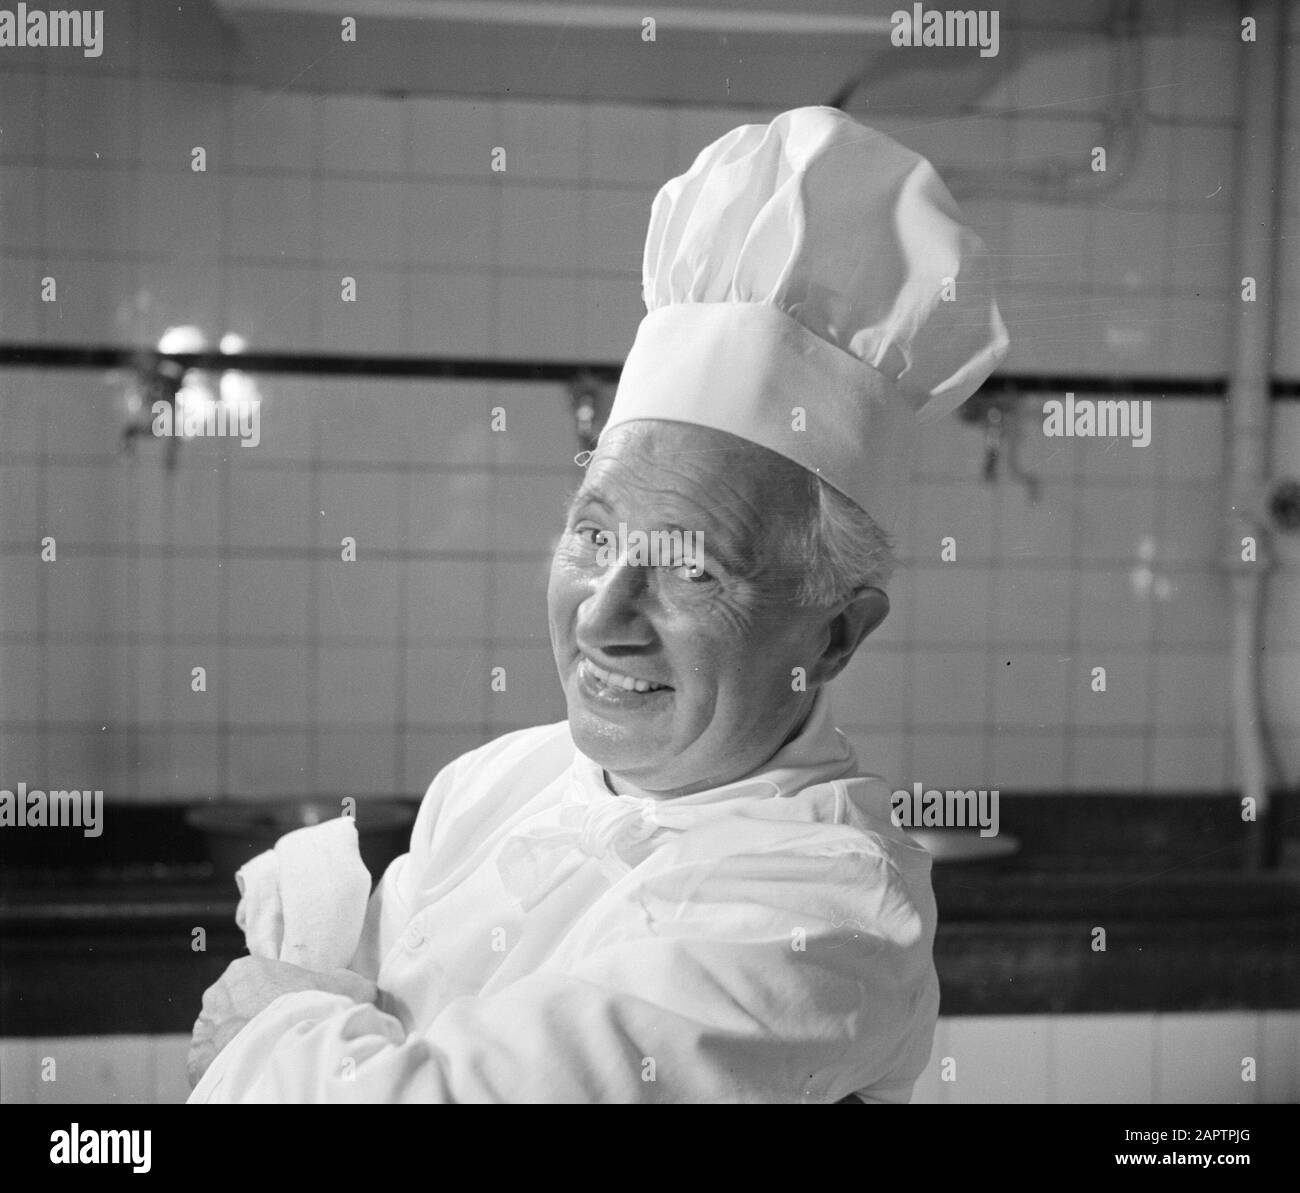 Cook in the kitchen: Rodi Roeters (model) as chef at Amstel Hotel  hotels, kitchens, cooks, food preparation, cooking art, Roeters, Rodi Date: 26 June 1954 Location: Amsterdam, Noord-Holland Keywords: hotels, kitchens, cooks, cooking, food preparation Personal name: Roeters, Rodi Institution name: Amstel Hotel Stock Photo